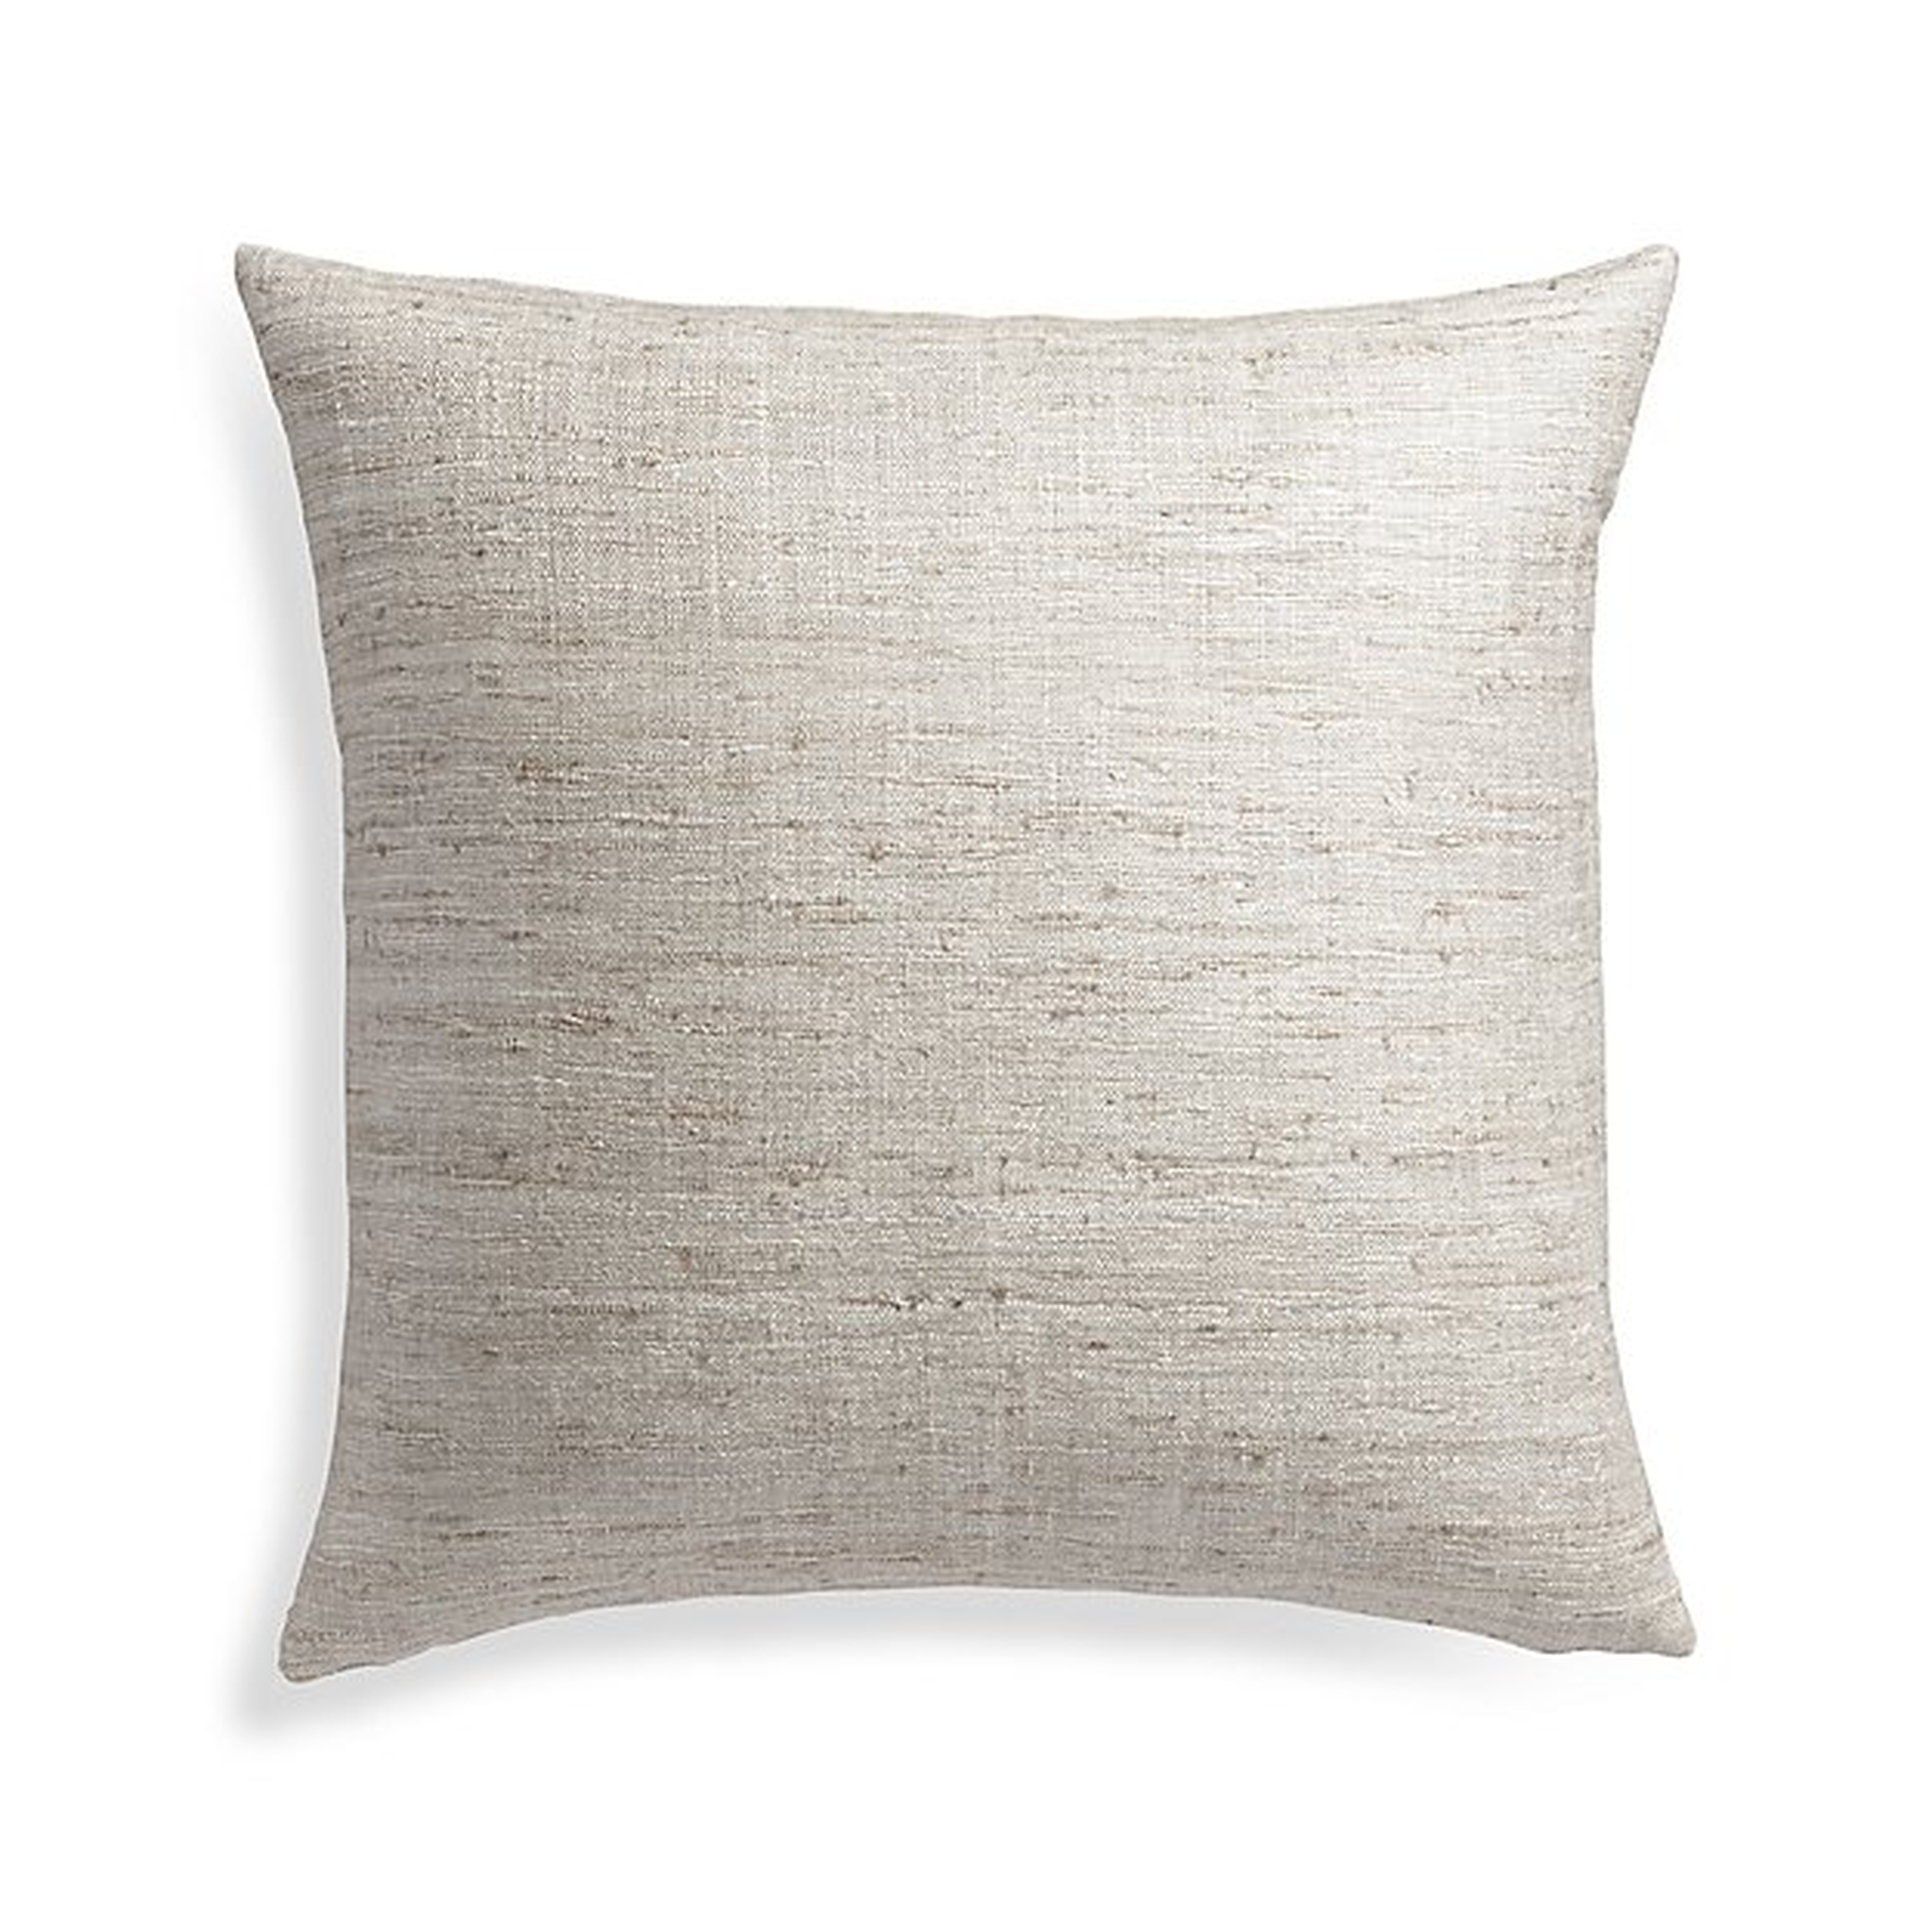 Light Gray Pillow with Feather Down Insert - Alloy - Crate and Barrel